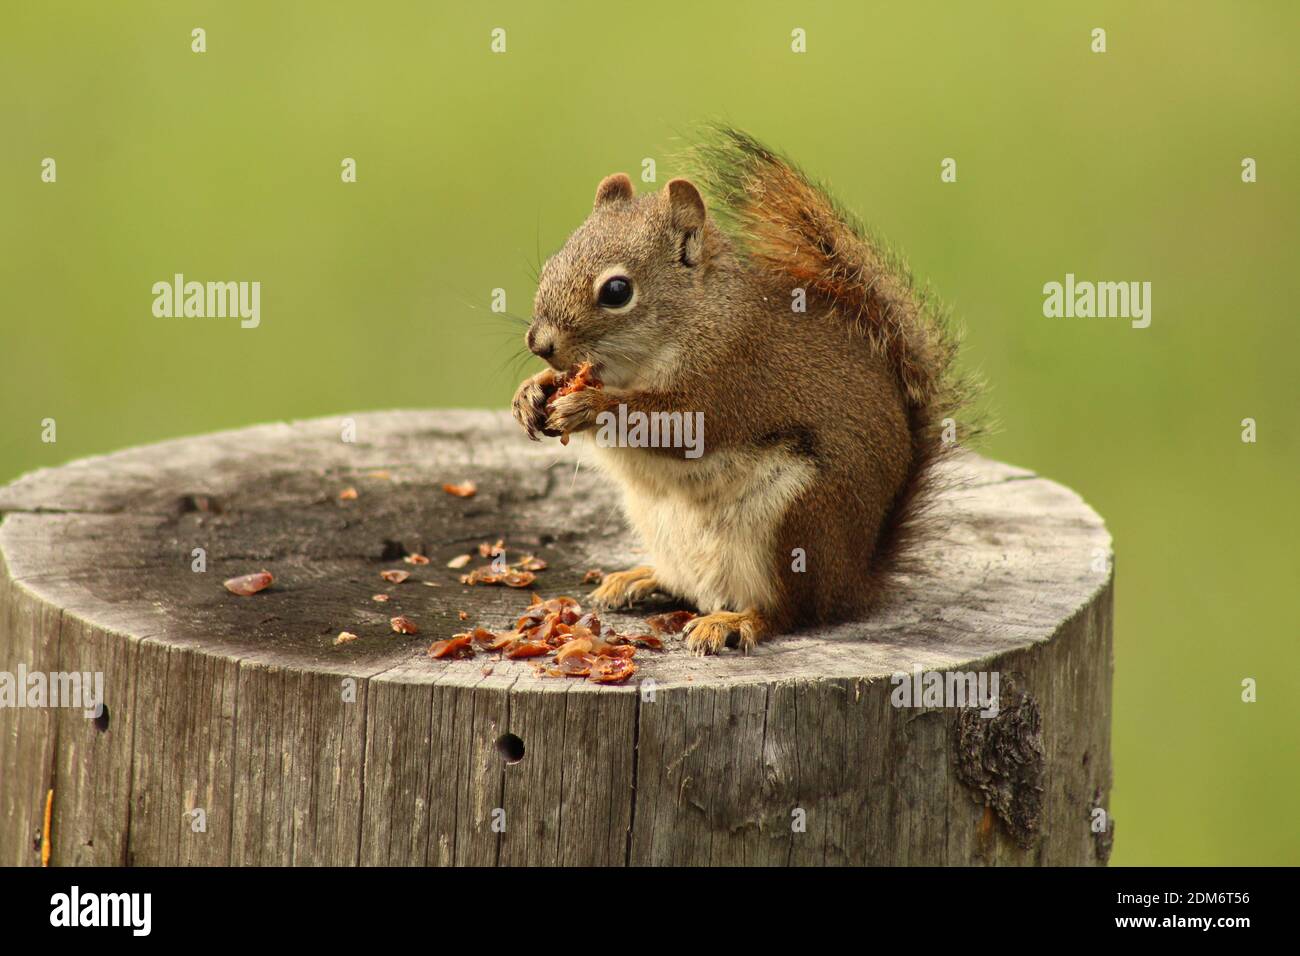 Close-up Of Squirrel Eating Food Stock Photo - Alamy